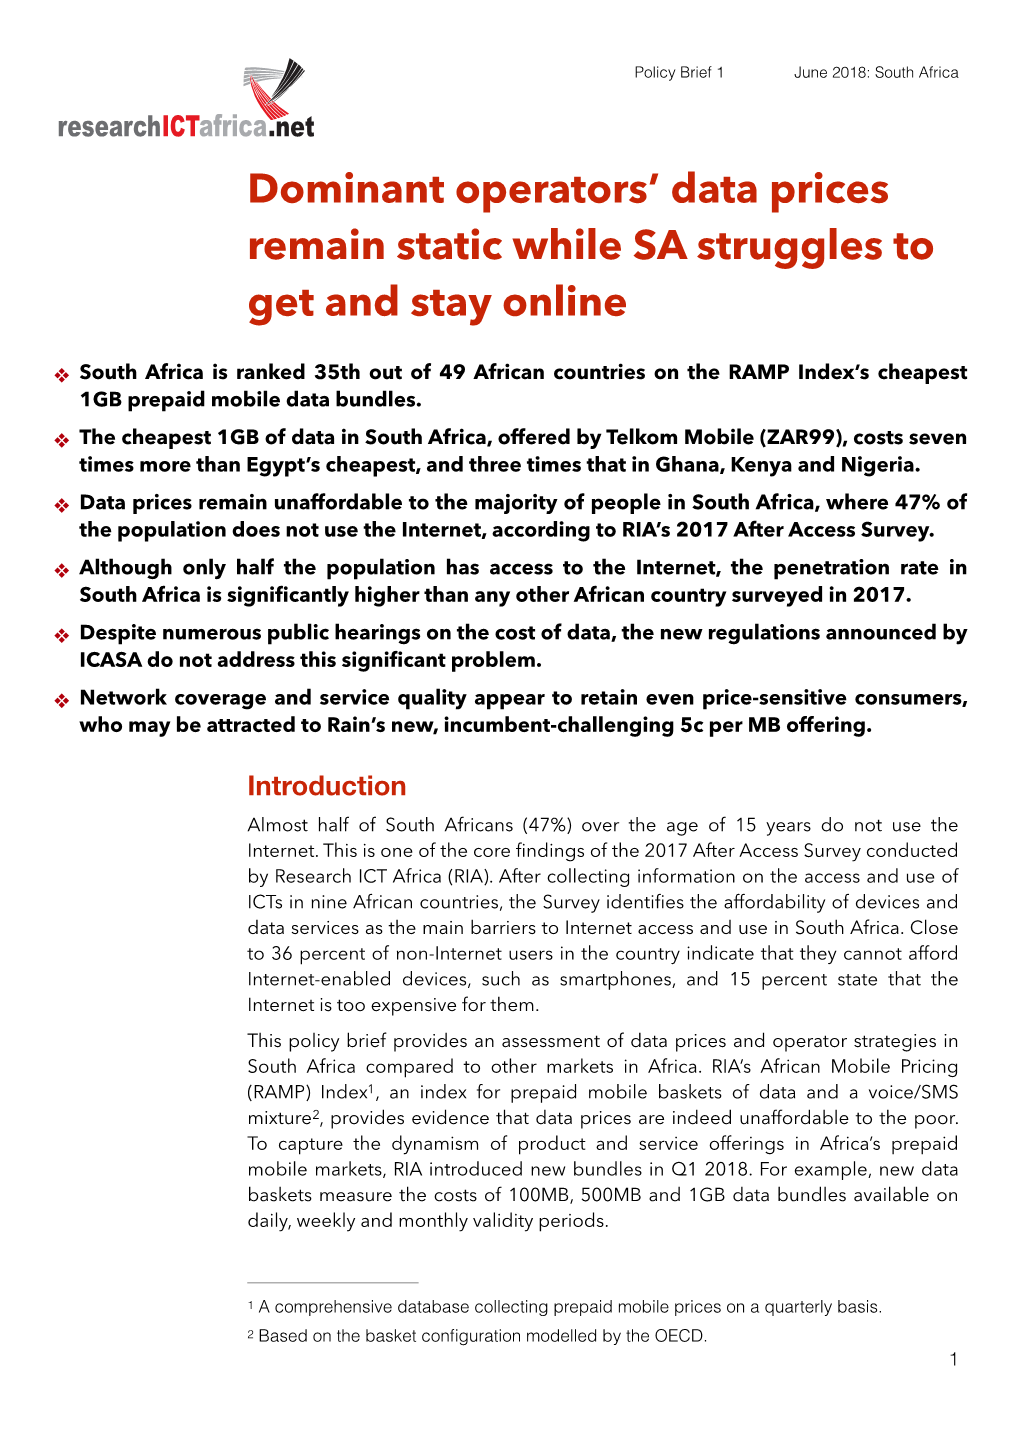 Dominant Operators' Data Prices Remain Static While SA Struggles to Get and Stay Online